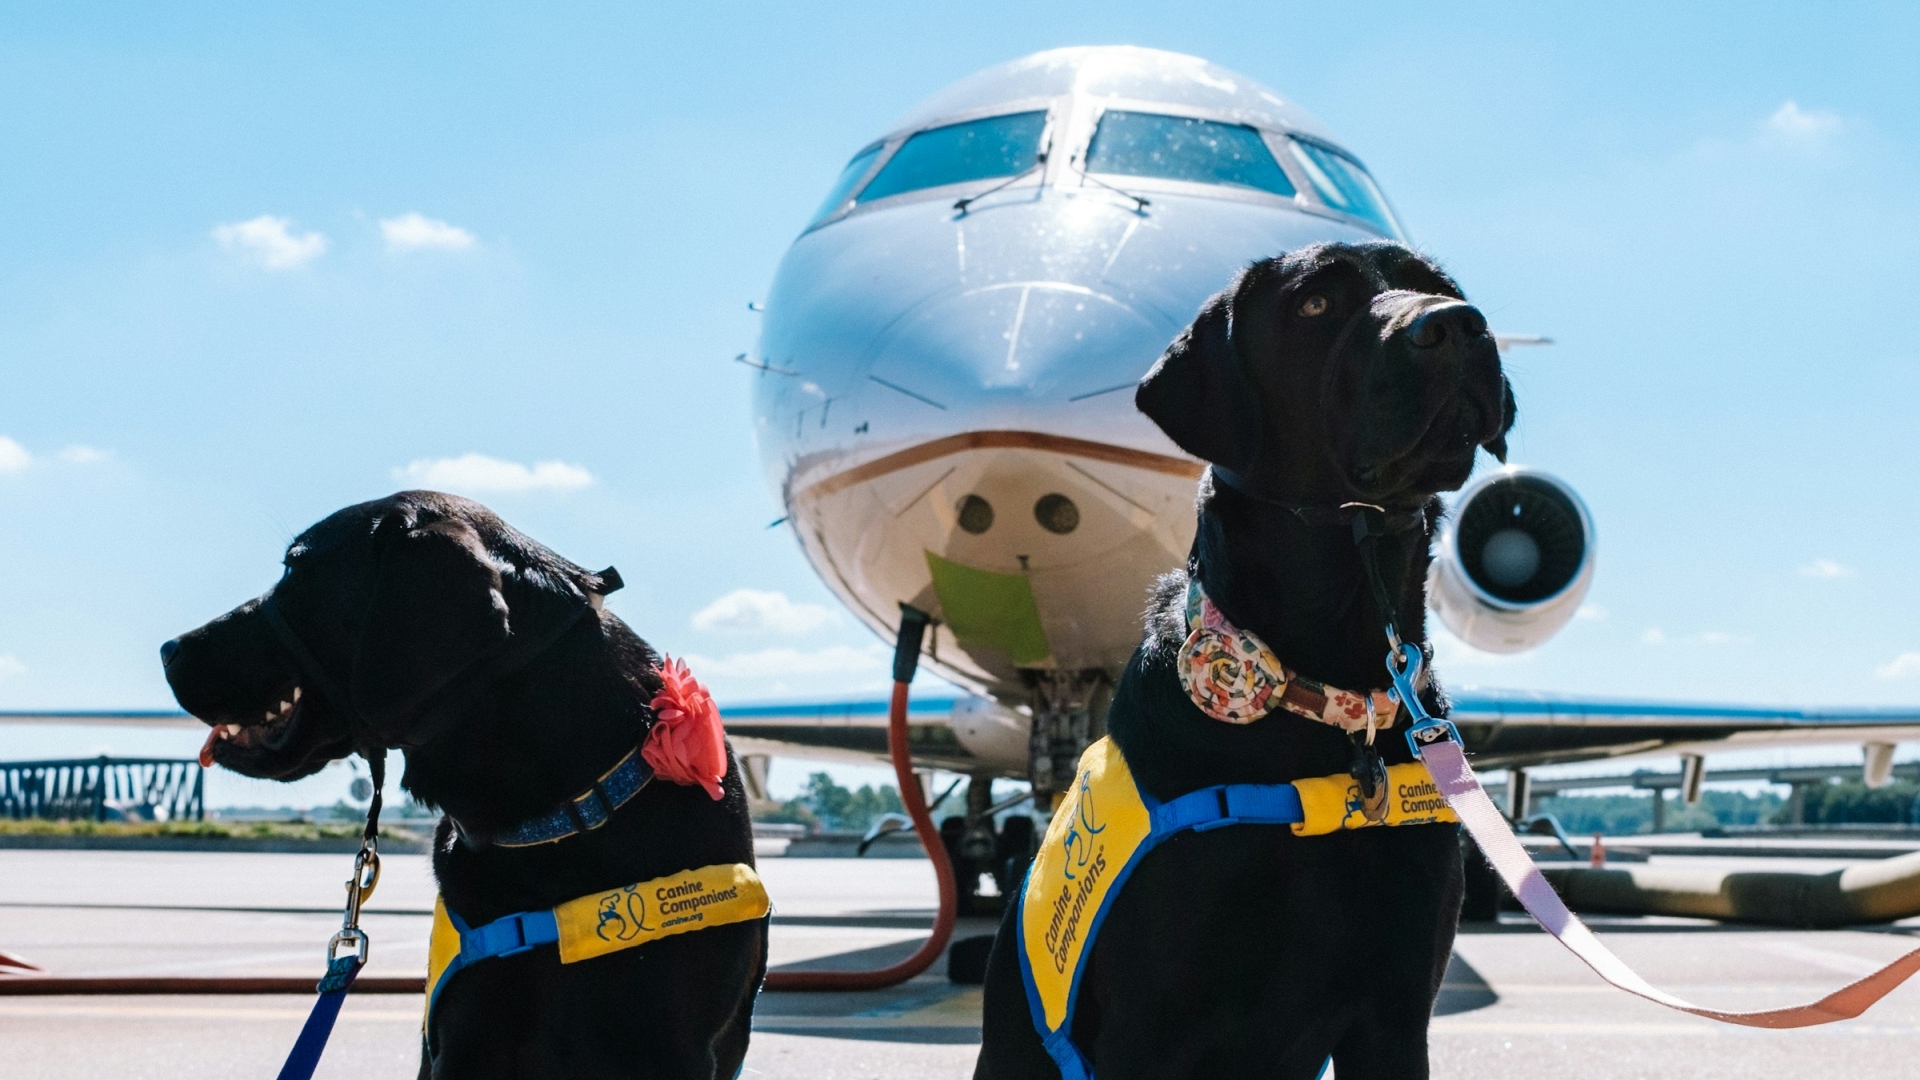 Dogs at the Airport, Aircraft